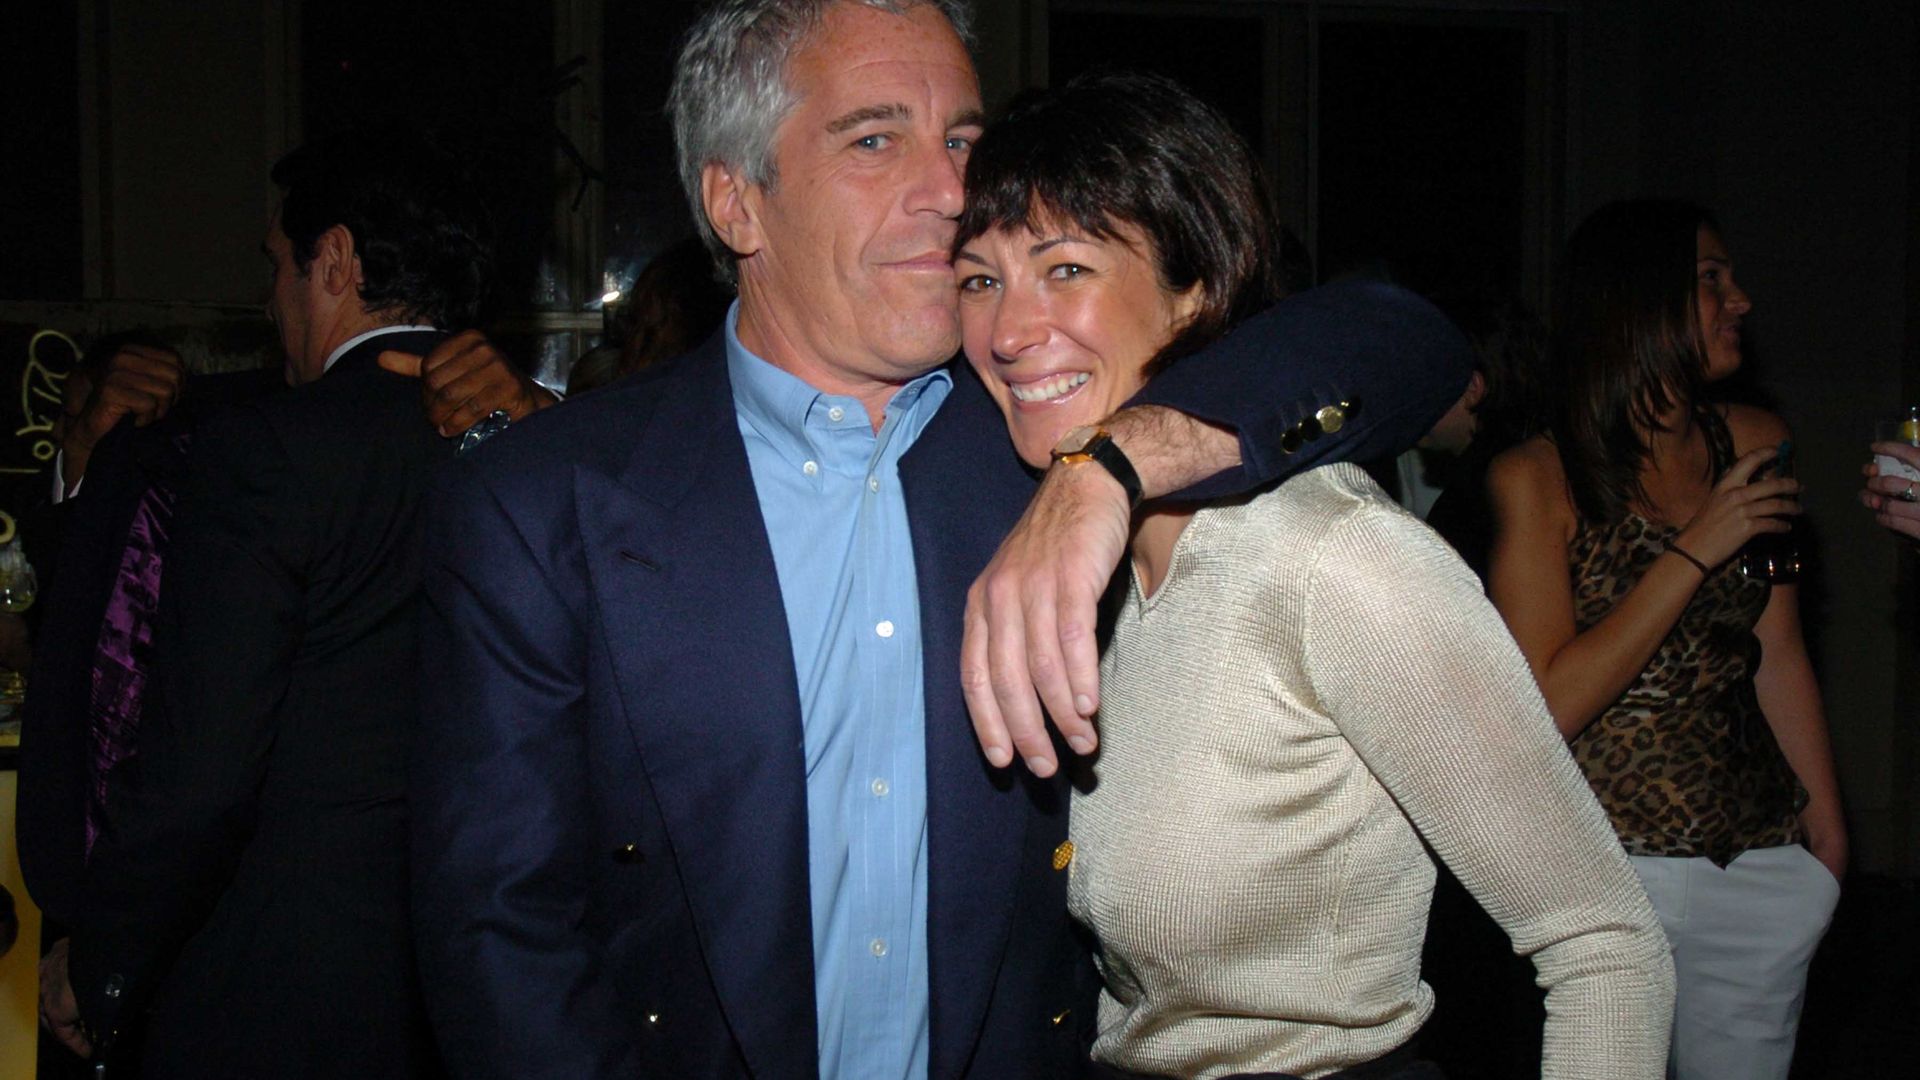 Jeffrey Epstein documents unsealed: why were they released and what happens next